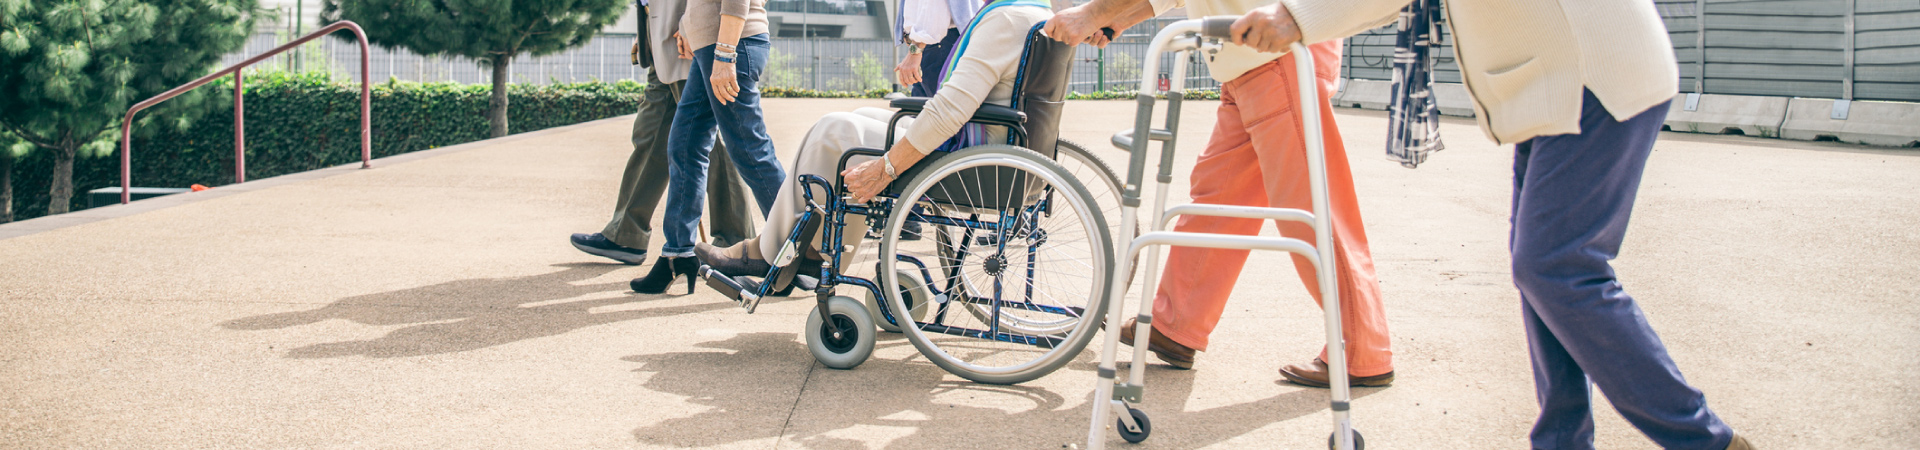 People using medical equipment rental including a wheelchair and a walk while out in an open area with concrete and steps